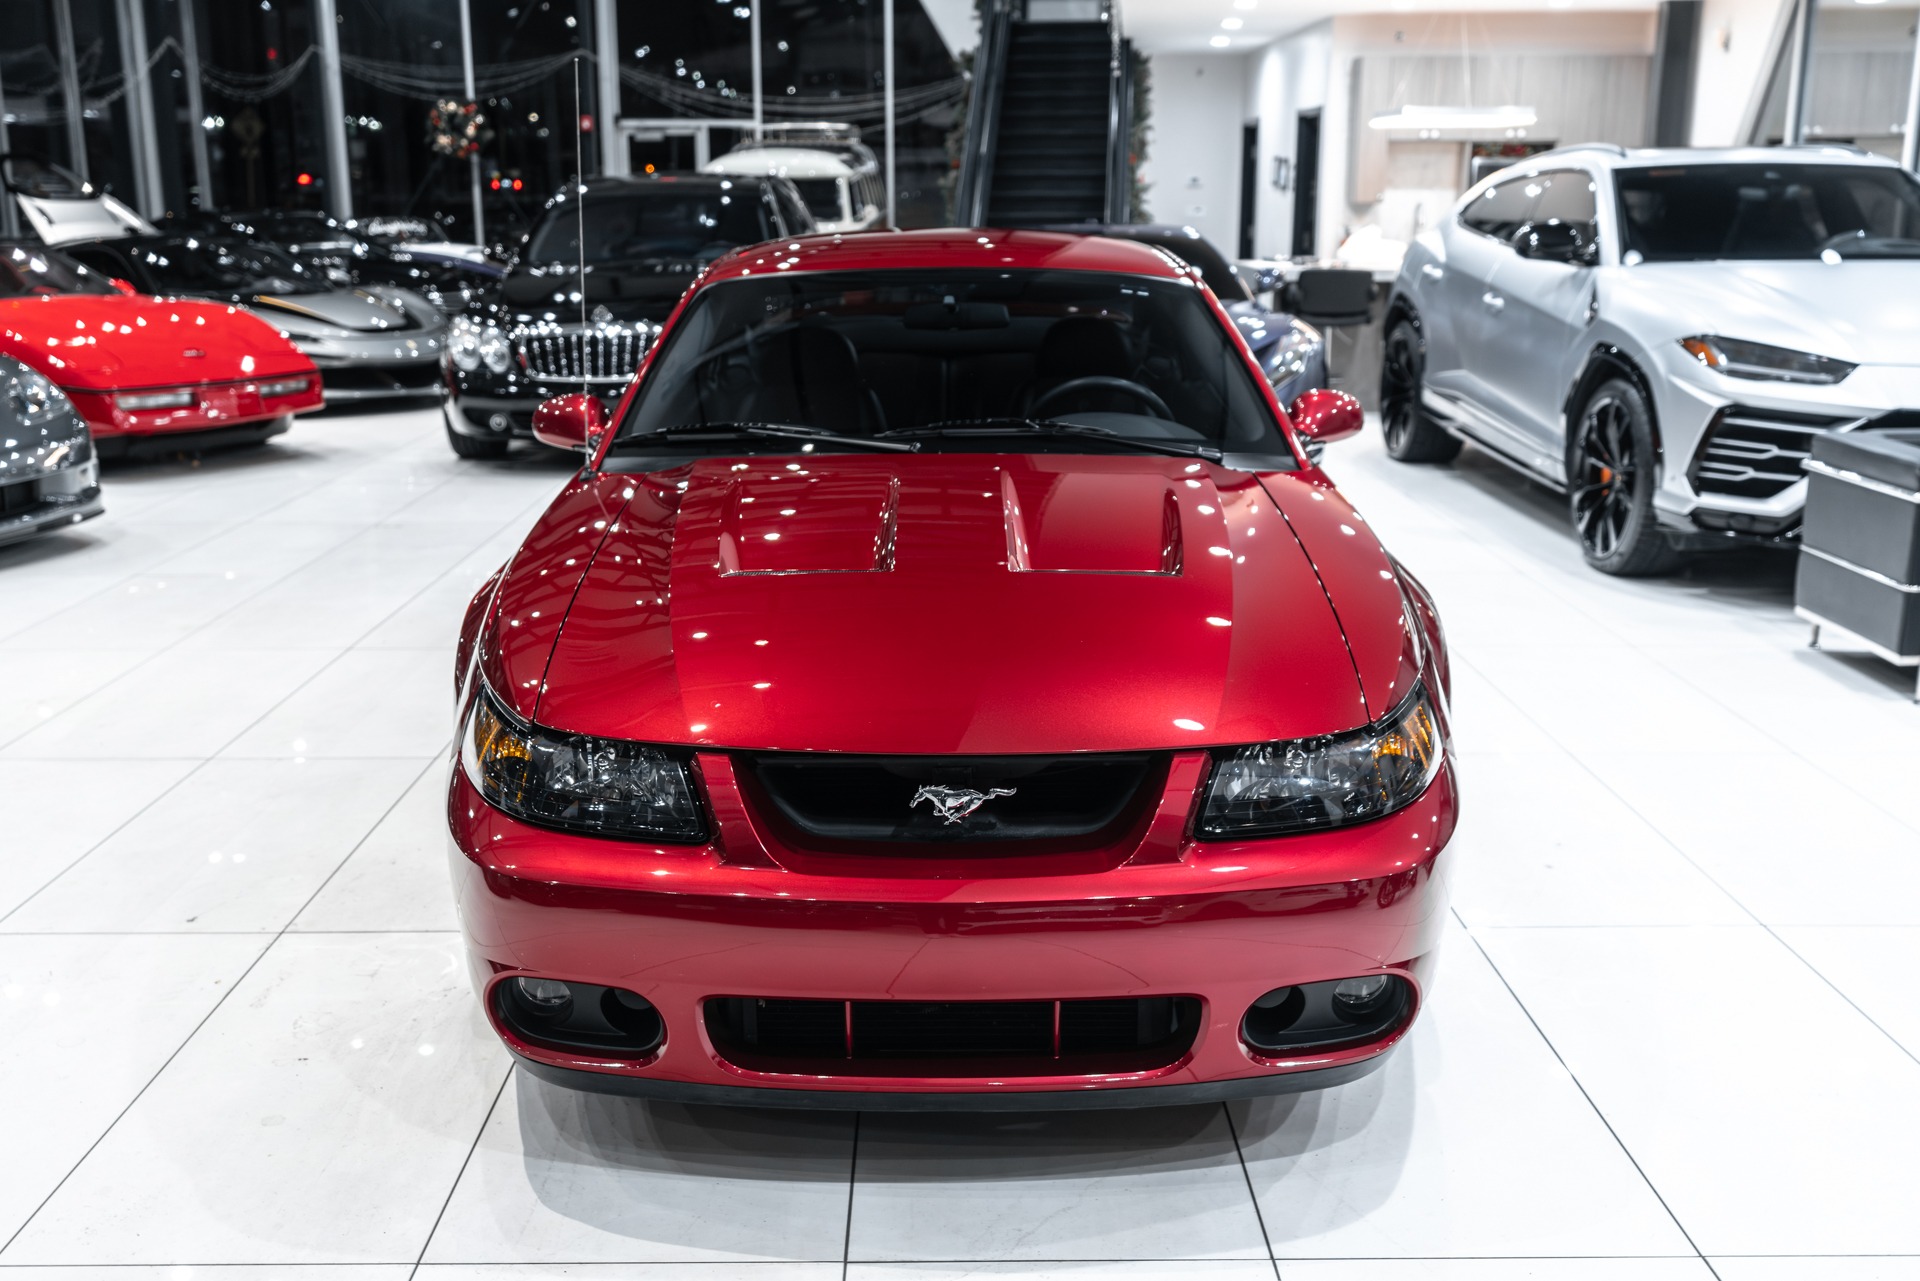 Used-2004-Ford-Mustang-SVT-Cobra-Coupe-Terminator-ONLY-14k-Miles-6-Speed-Manual-Collector-Condition